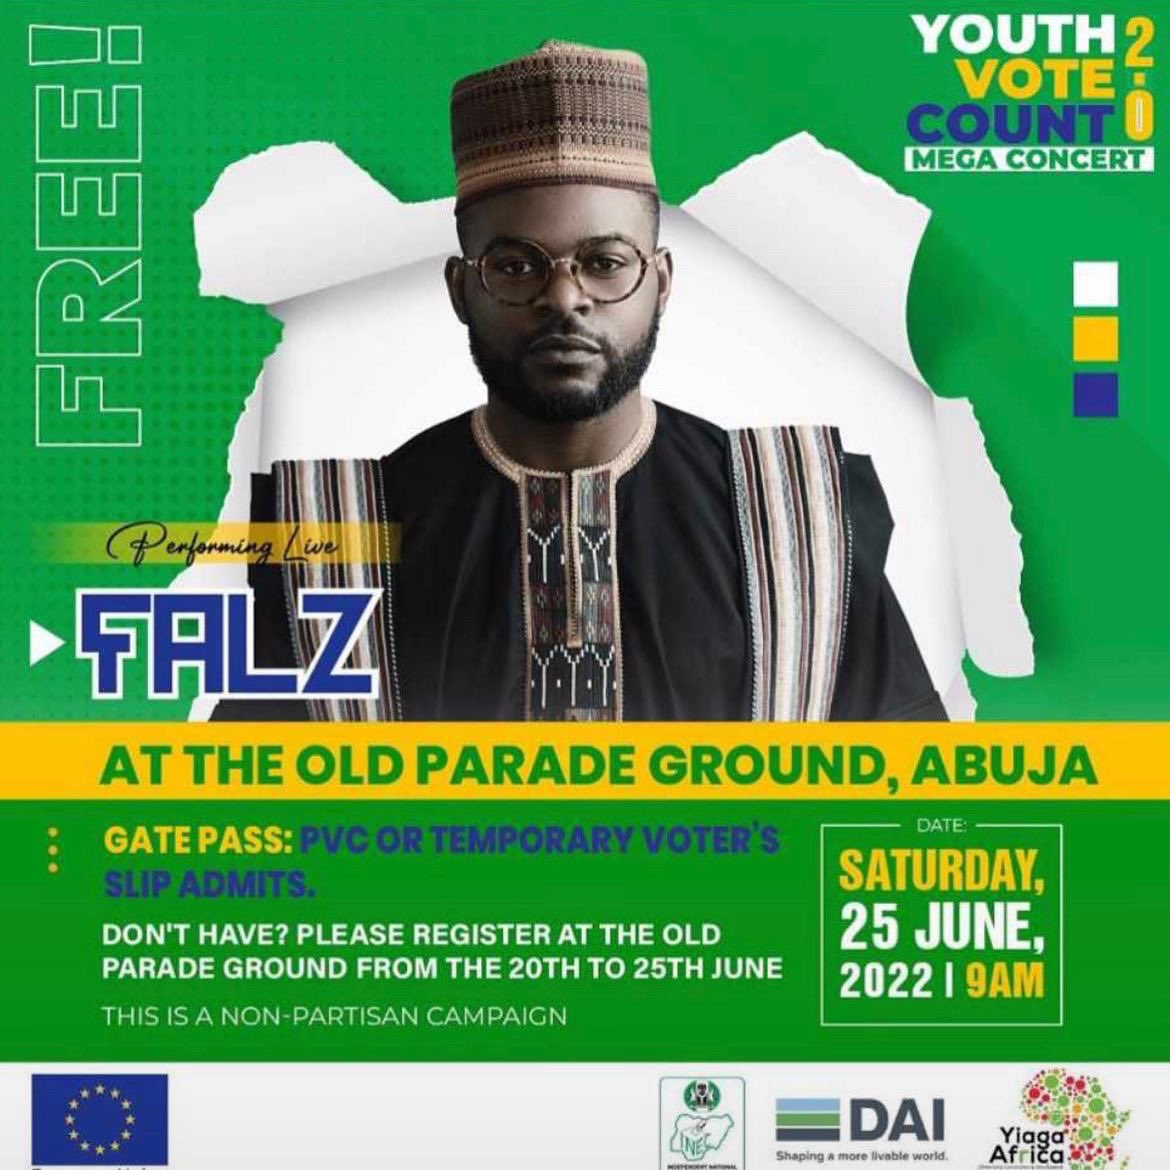 Do you want to access the biggest music concert in Abuja?

Registration is ongoing at the Old Parade Ground from today to 25th June, 2022.
Time: 9am - 5pm Daily

You can also transfer your PVC, request a replacement or correct your details
#YouthVoteCountNG
#AbujaTwitterCommunity